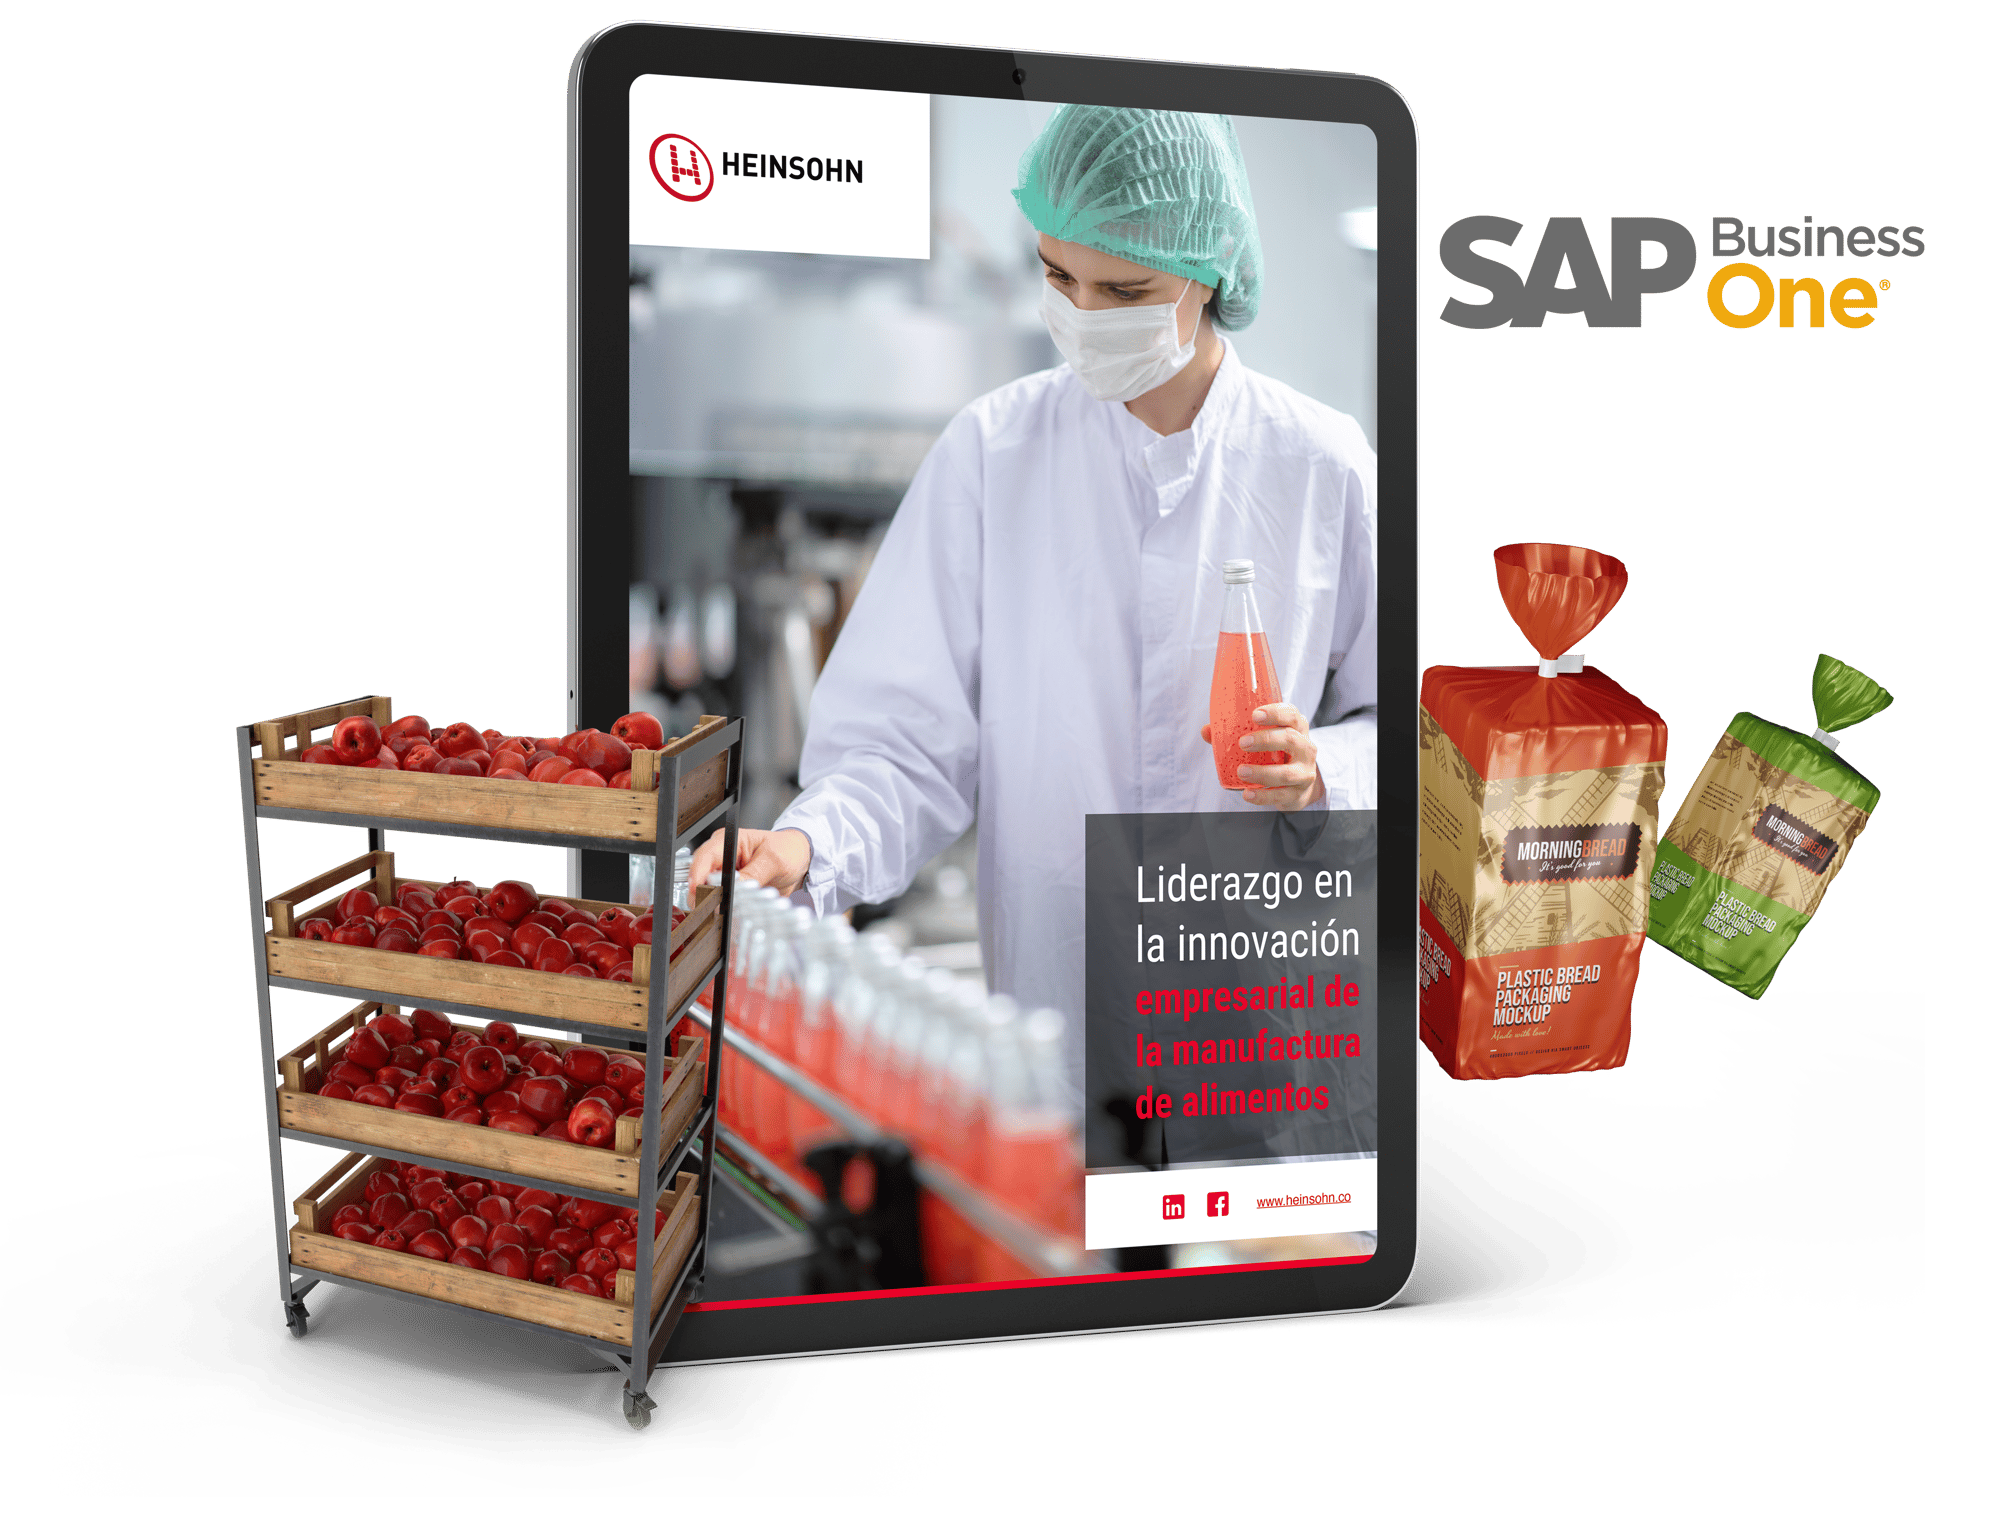 Ebook_Sector alimentos_Spa Business One